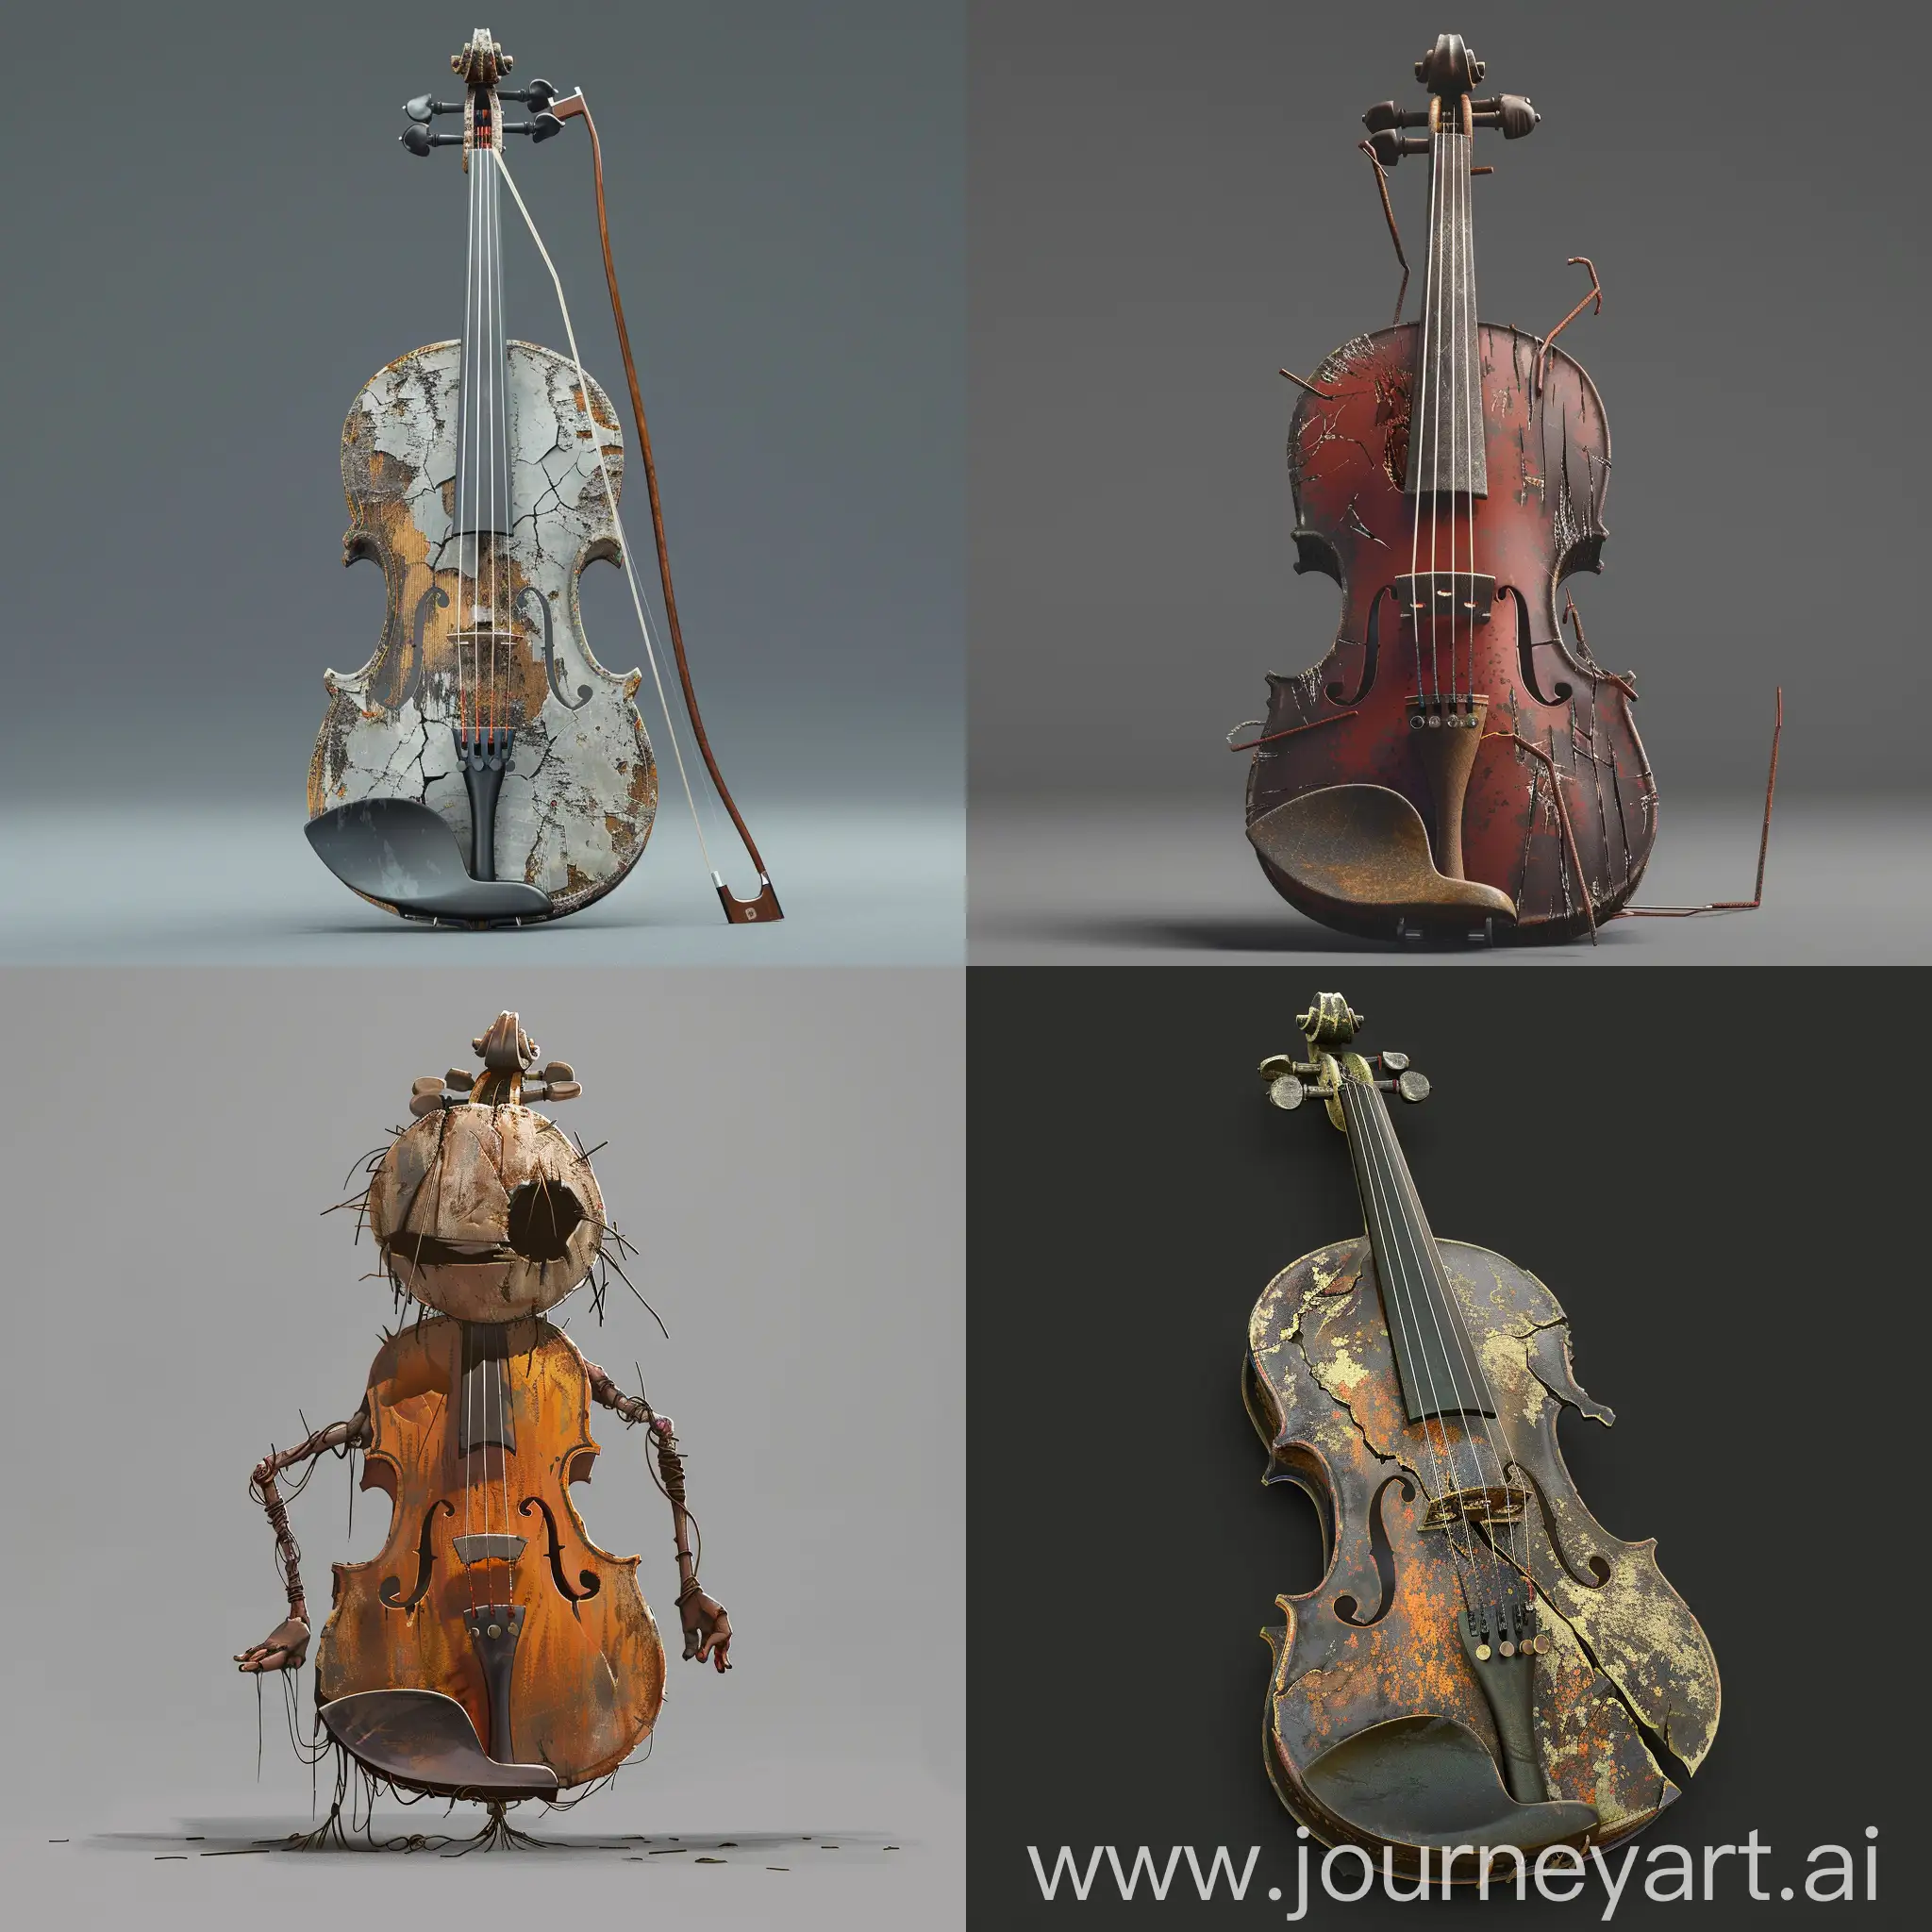 generate a character based on a broken violin . Its strings are frayed, its body scarred.

